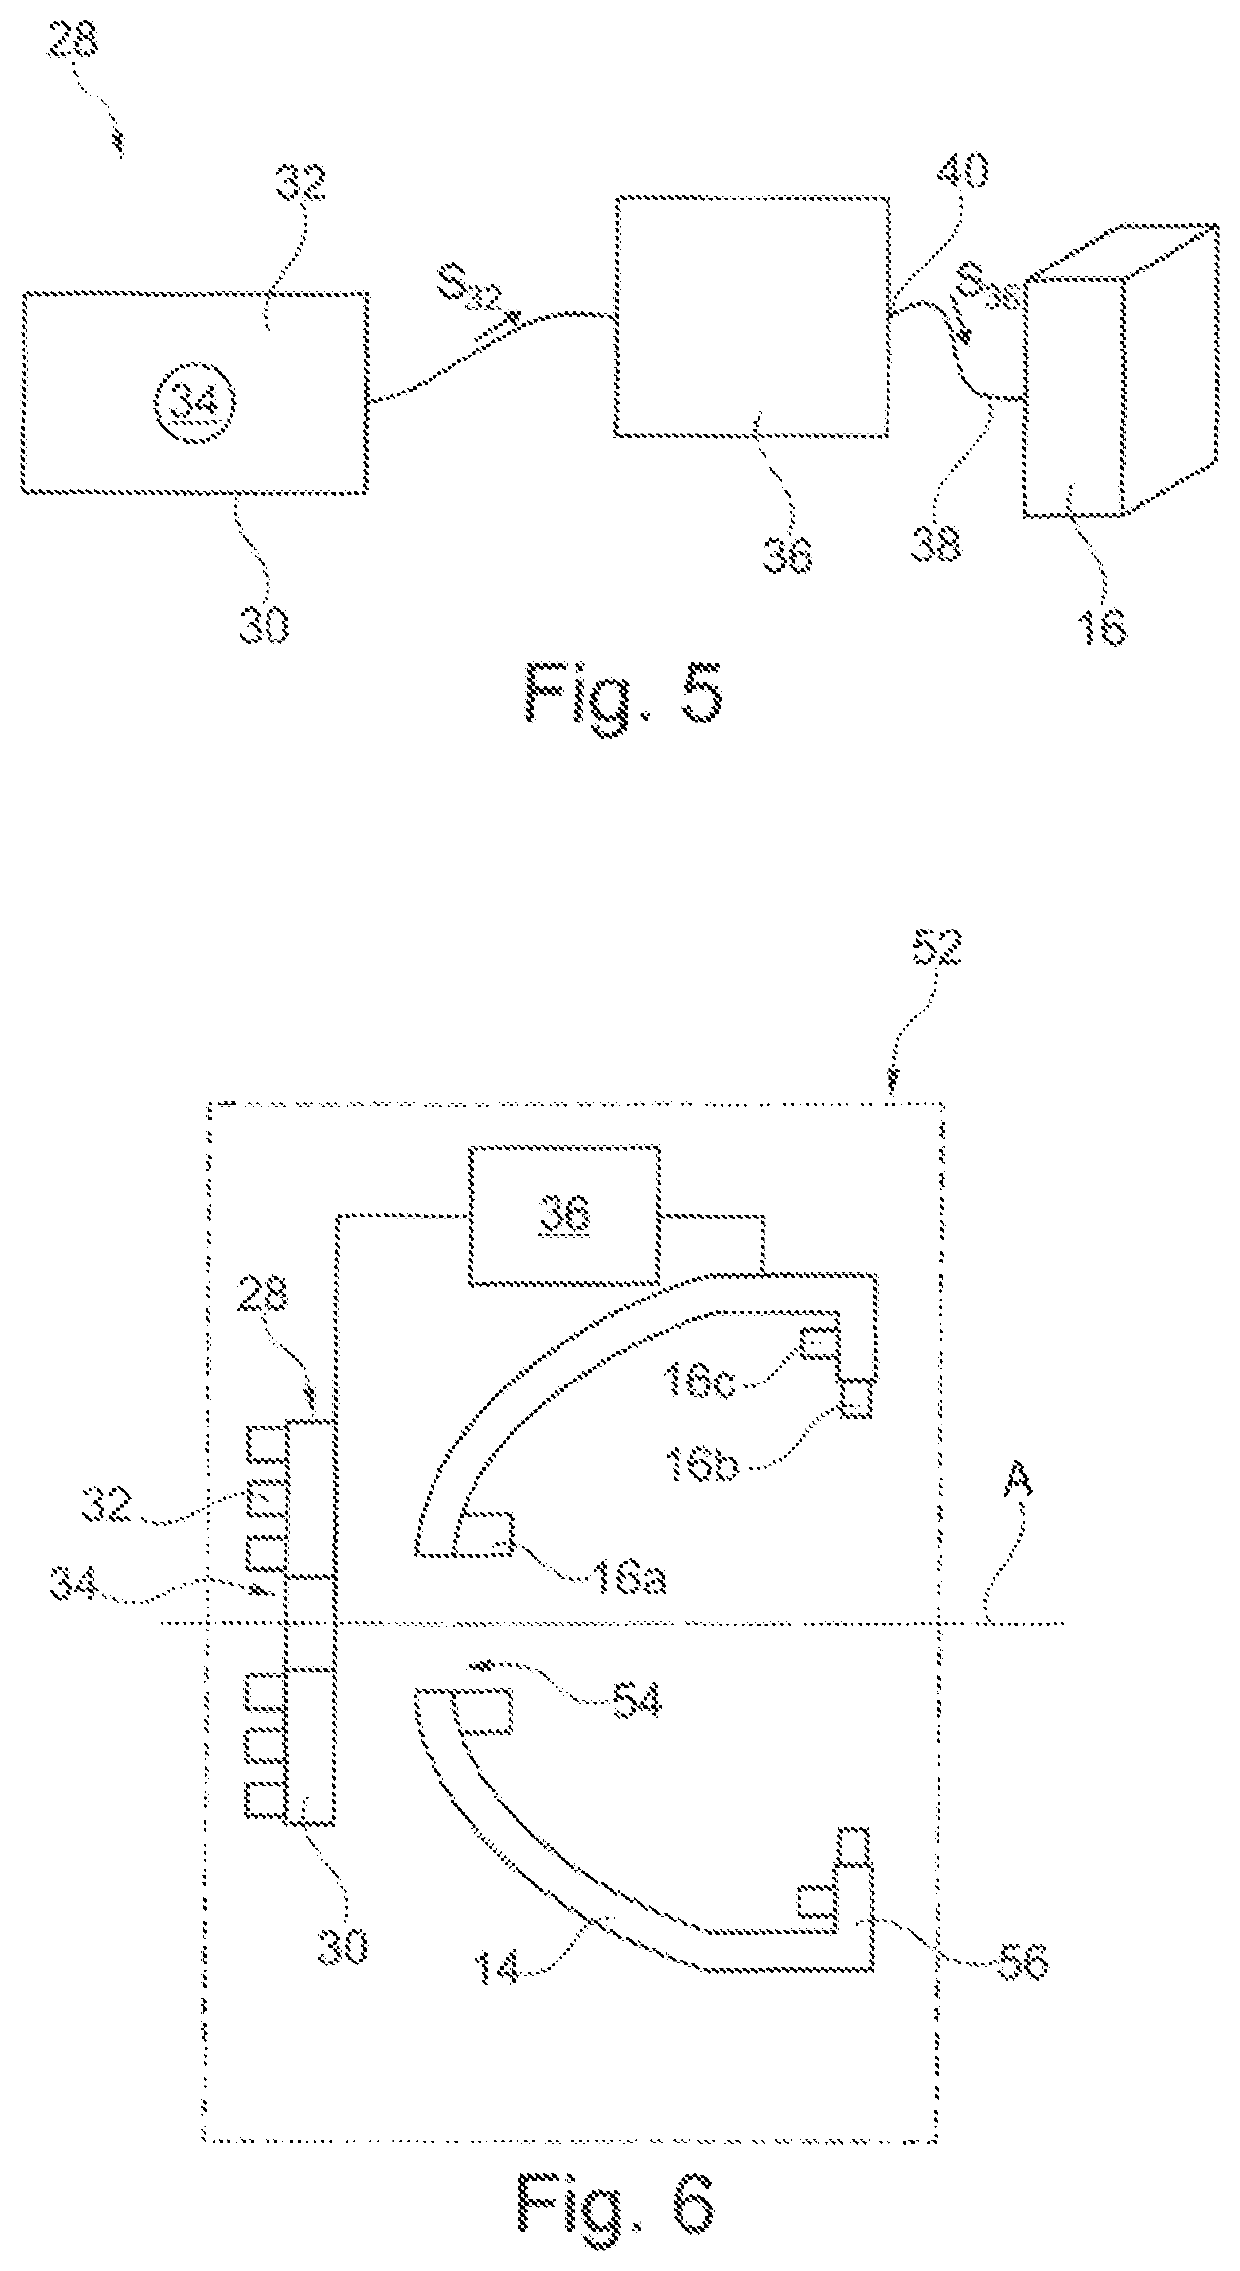 Control interface for a machine-vision lighting device